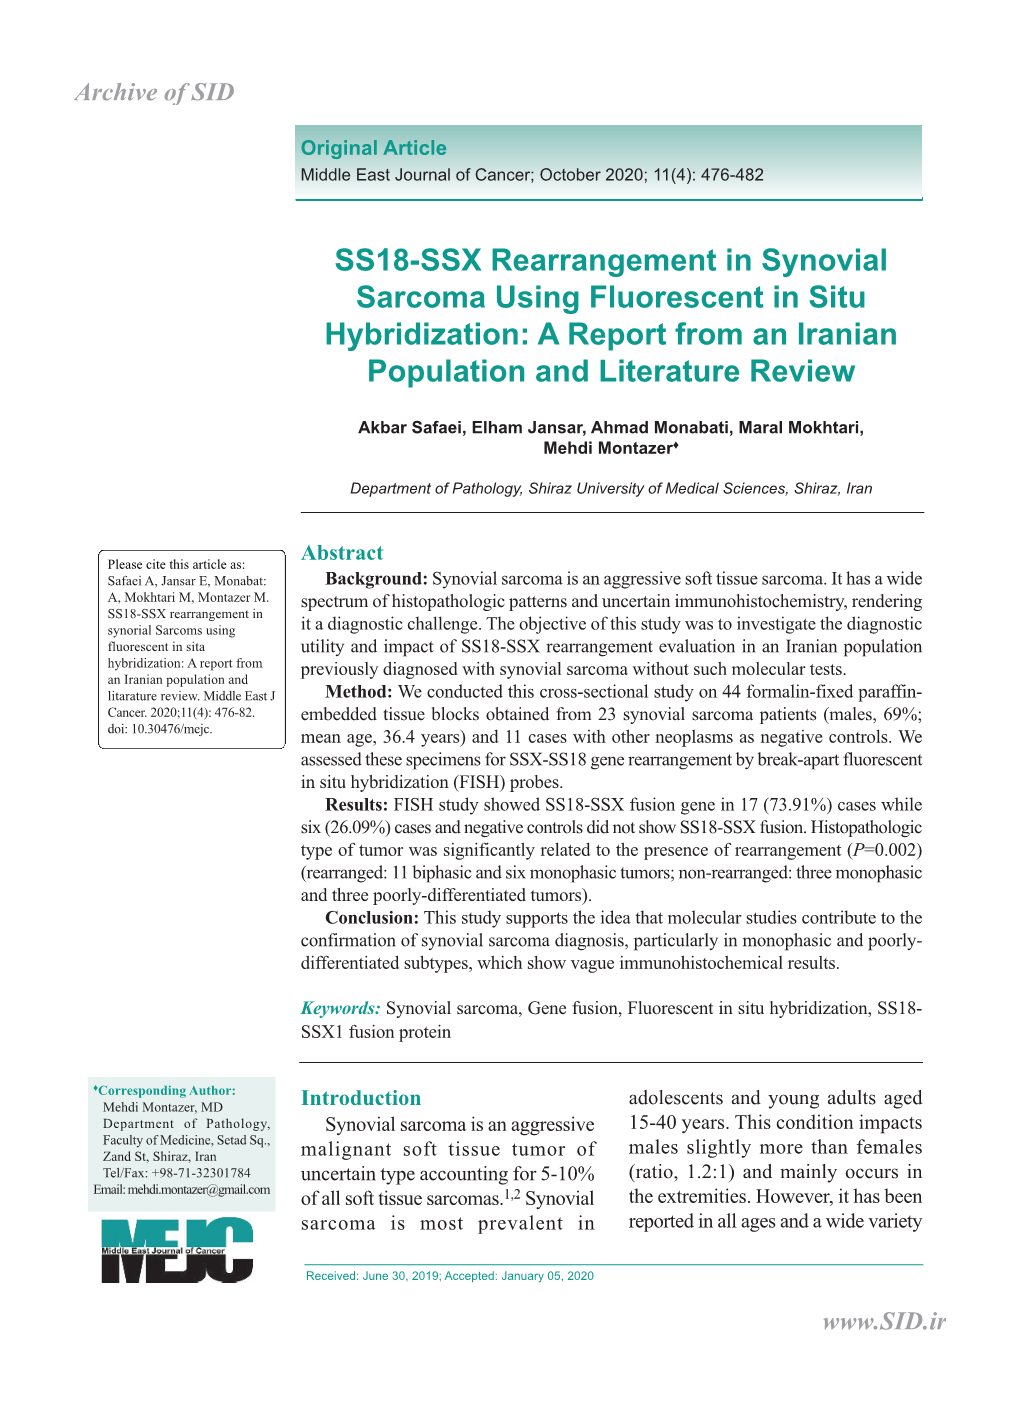 SS18-SSX Rearrangement in Synovial Sarcoma Using Fluorescent in Situ Hybridization: a Report from an Iranian Population and Literature Review